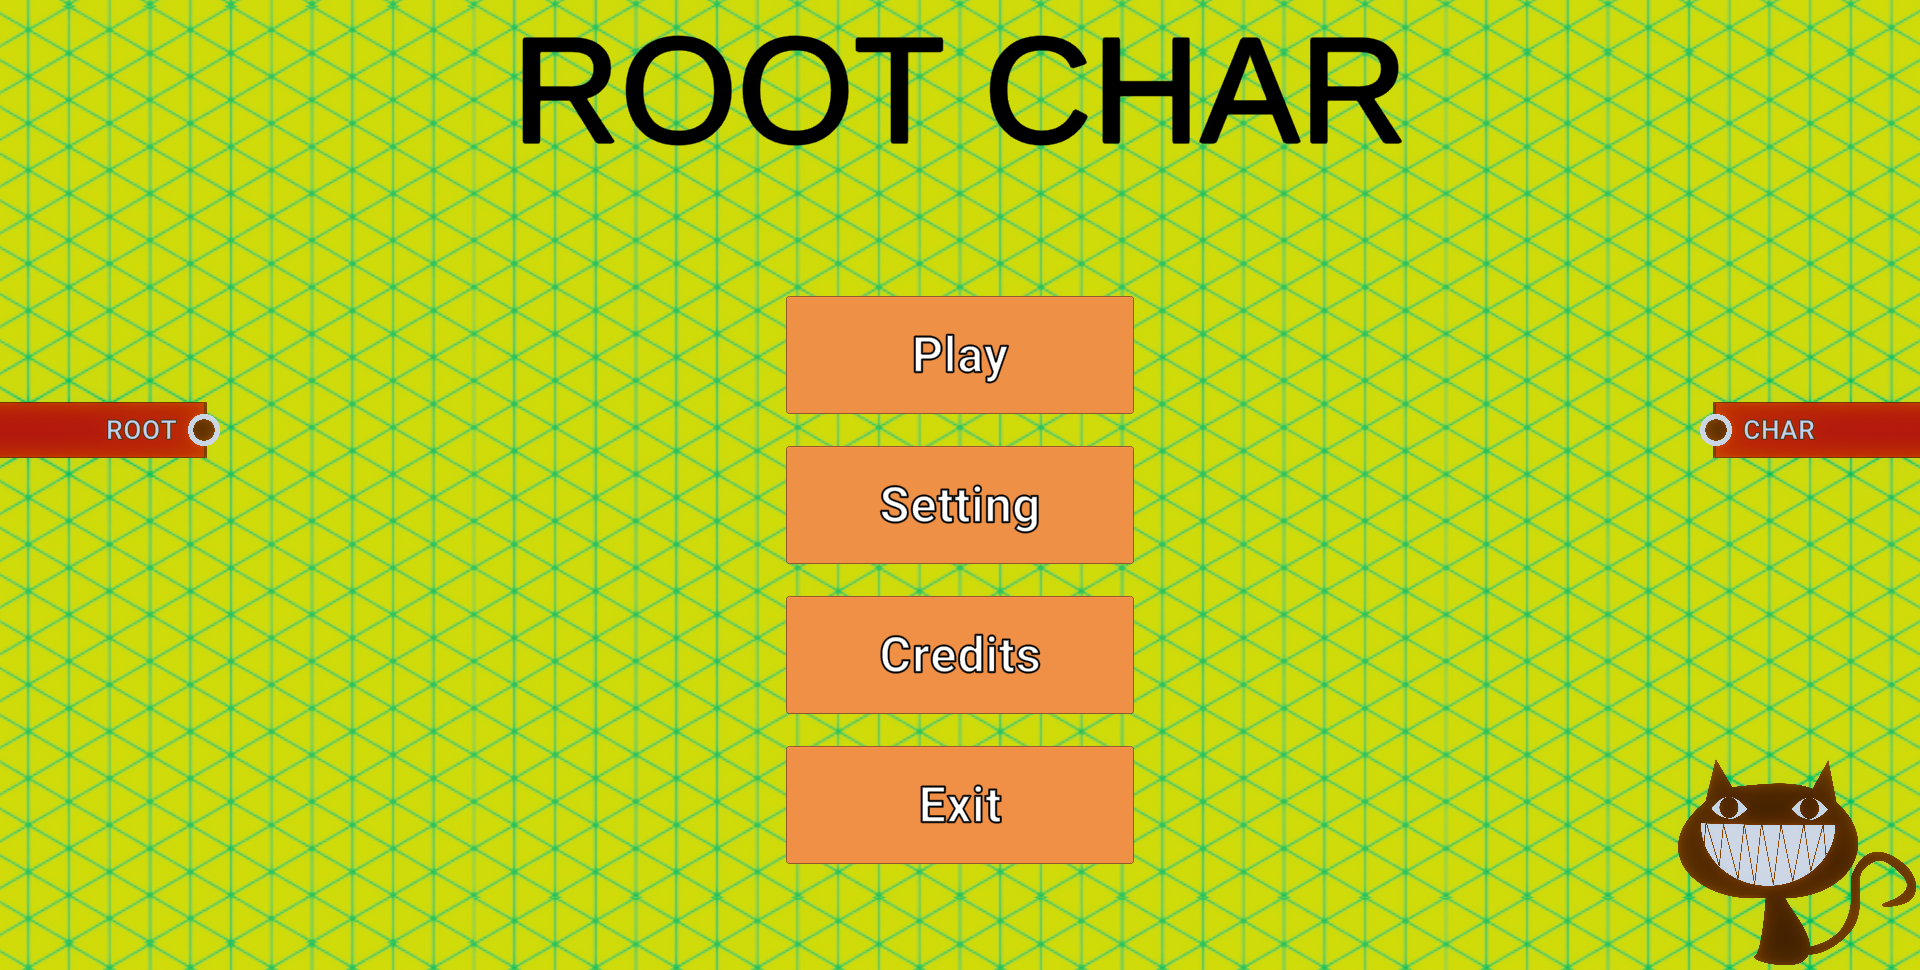 ROOT CHAR